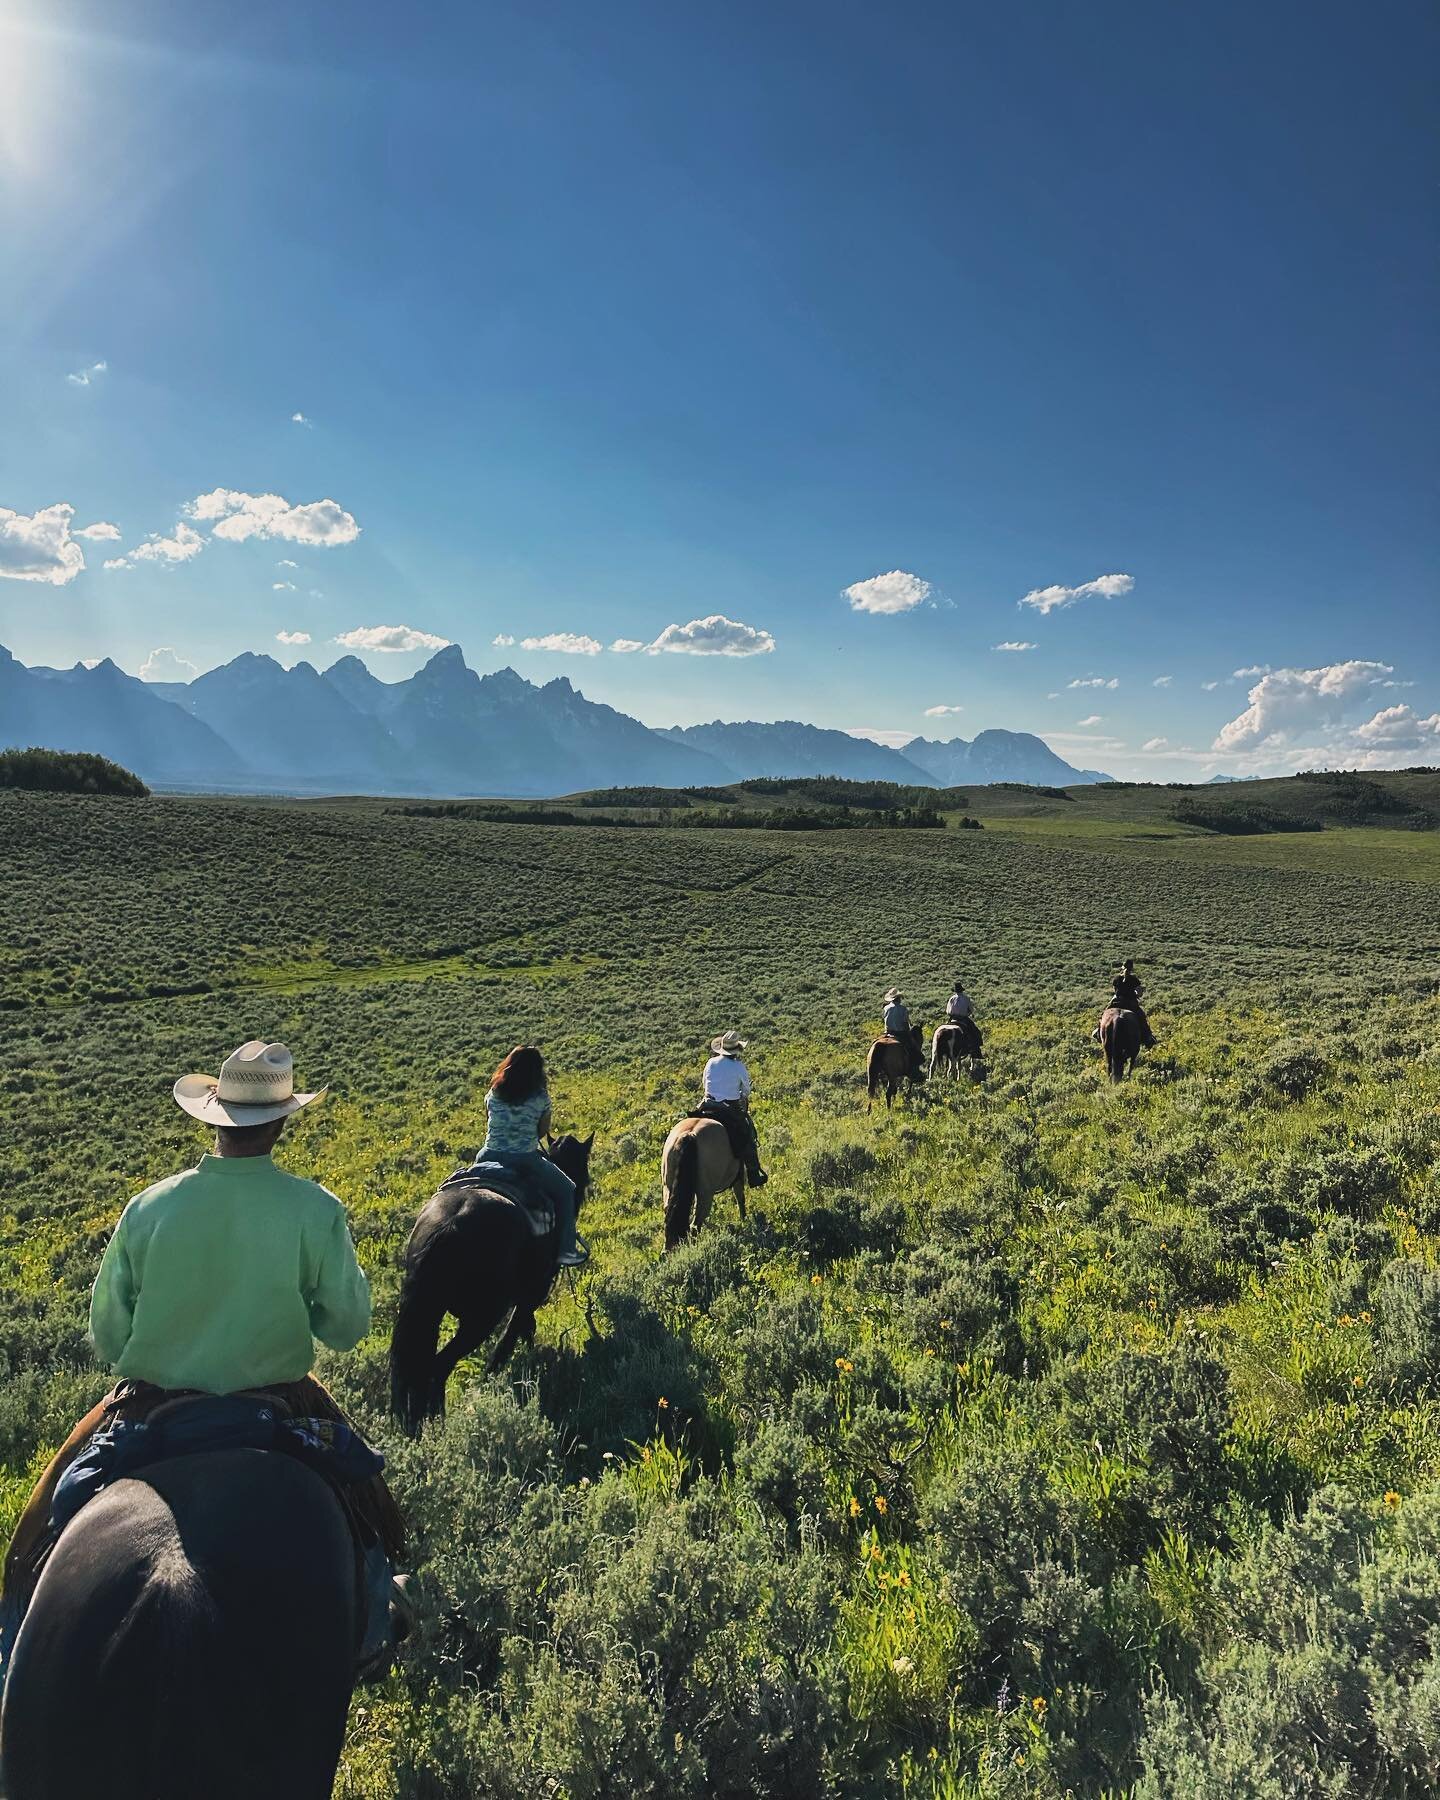 Book your seat in a saddle with JH Outfitting Company to see the best view of the Tetons Wyoming has to offer! Teton Tapas dinner rides Friday-Sunday, custom tailored trail rides any day of the week! Link in bio for more info.

www.jhoutfittingcompan